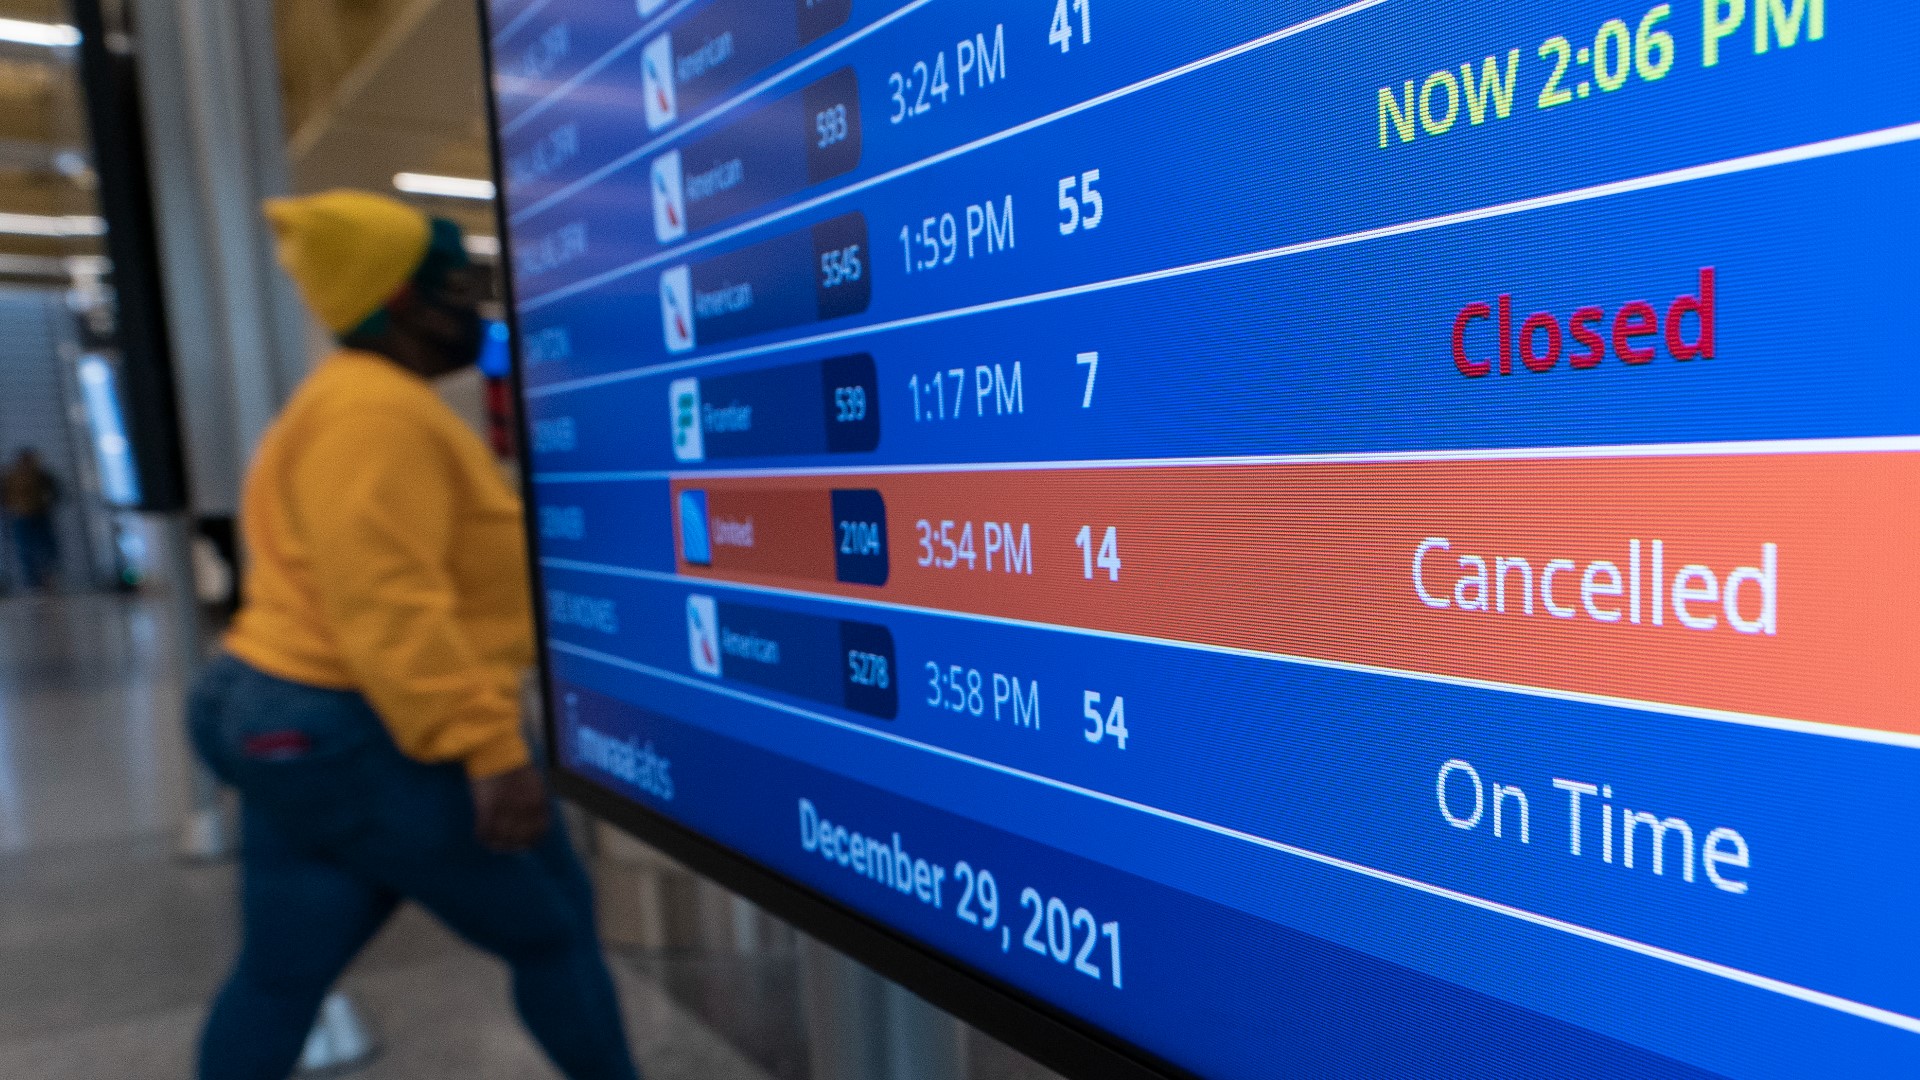 Under the proposed rule change, a refund would be required if a plane departed or arrived more than three hours behind schedule.